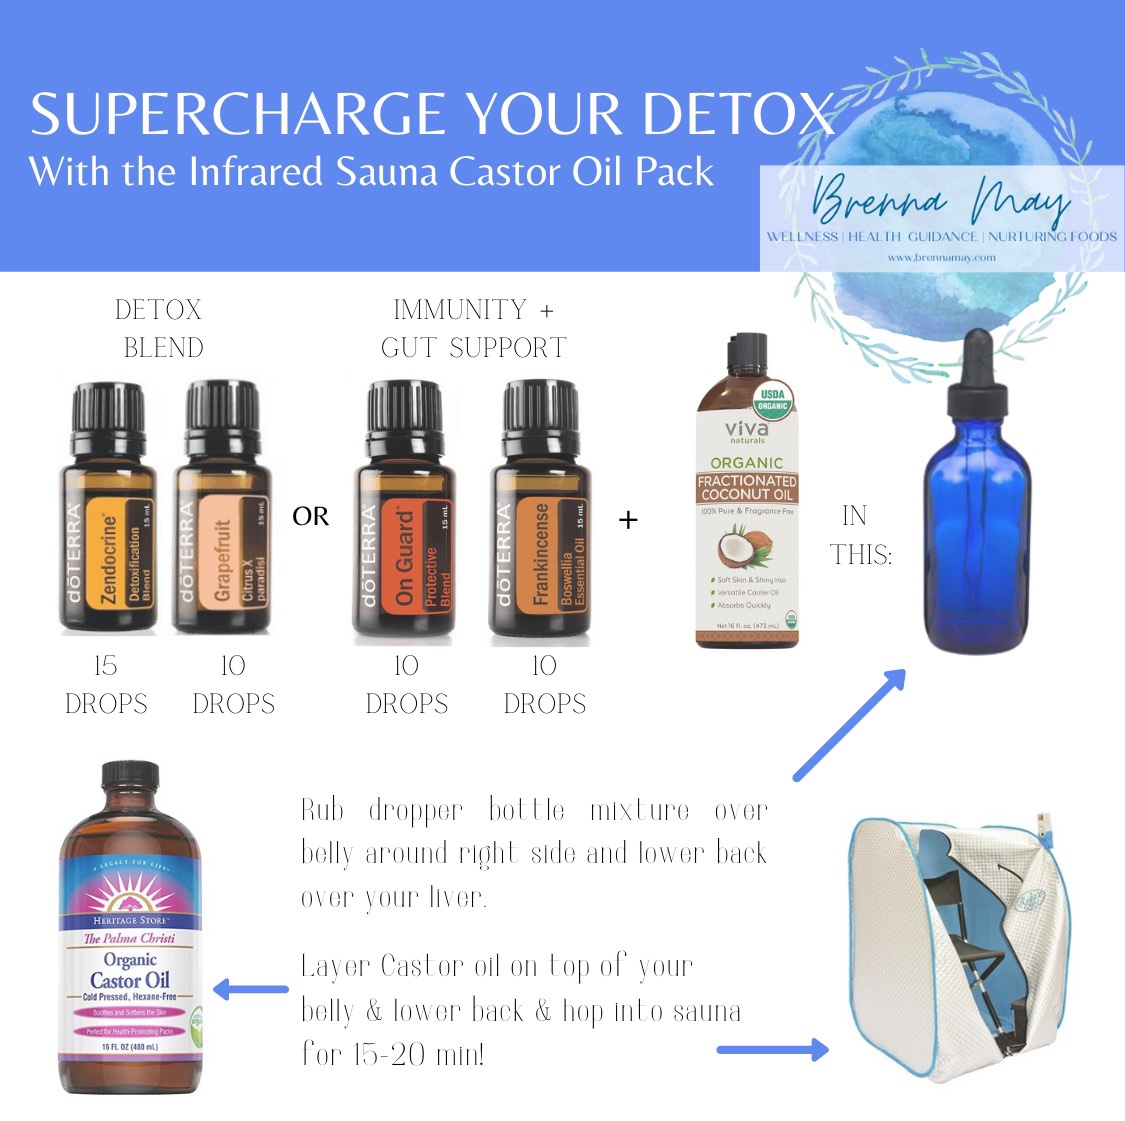 Supercharge your Detox with an Infrared Sauna Boosted Castor Oil pack!